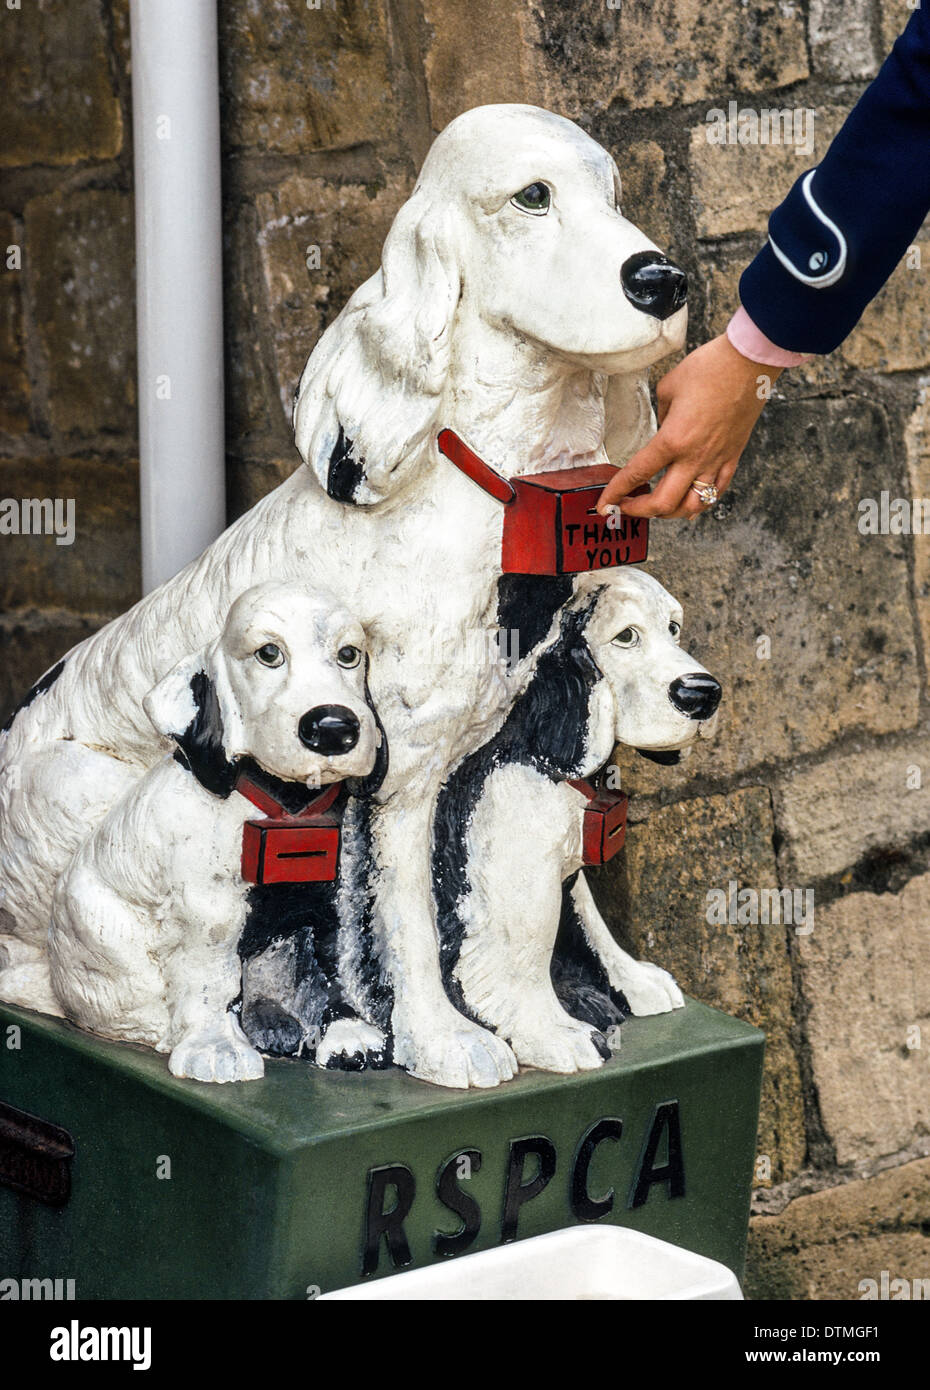 Donations to RSPCA collection boxes like this one in the Cotswolds of England help support the Royal Society for the Prevention of Cruelty to Animals. Stock Photo